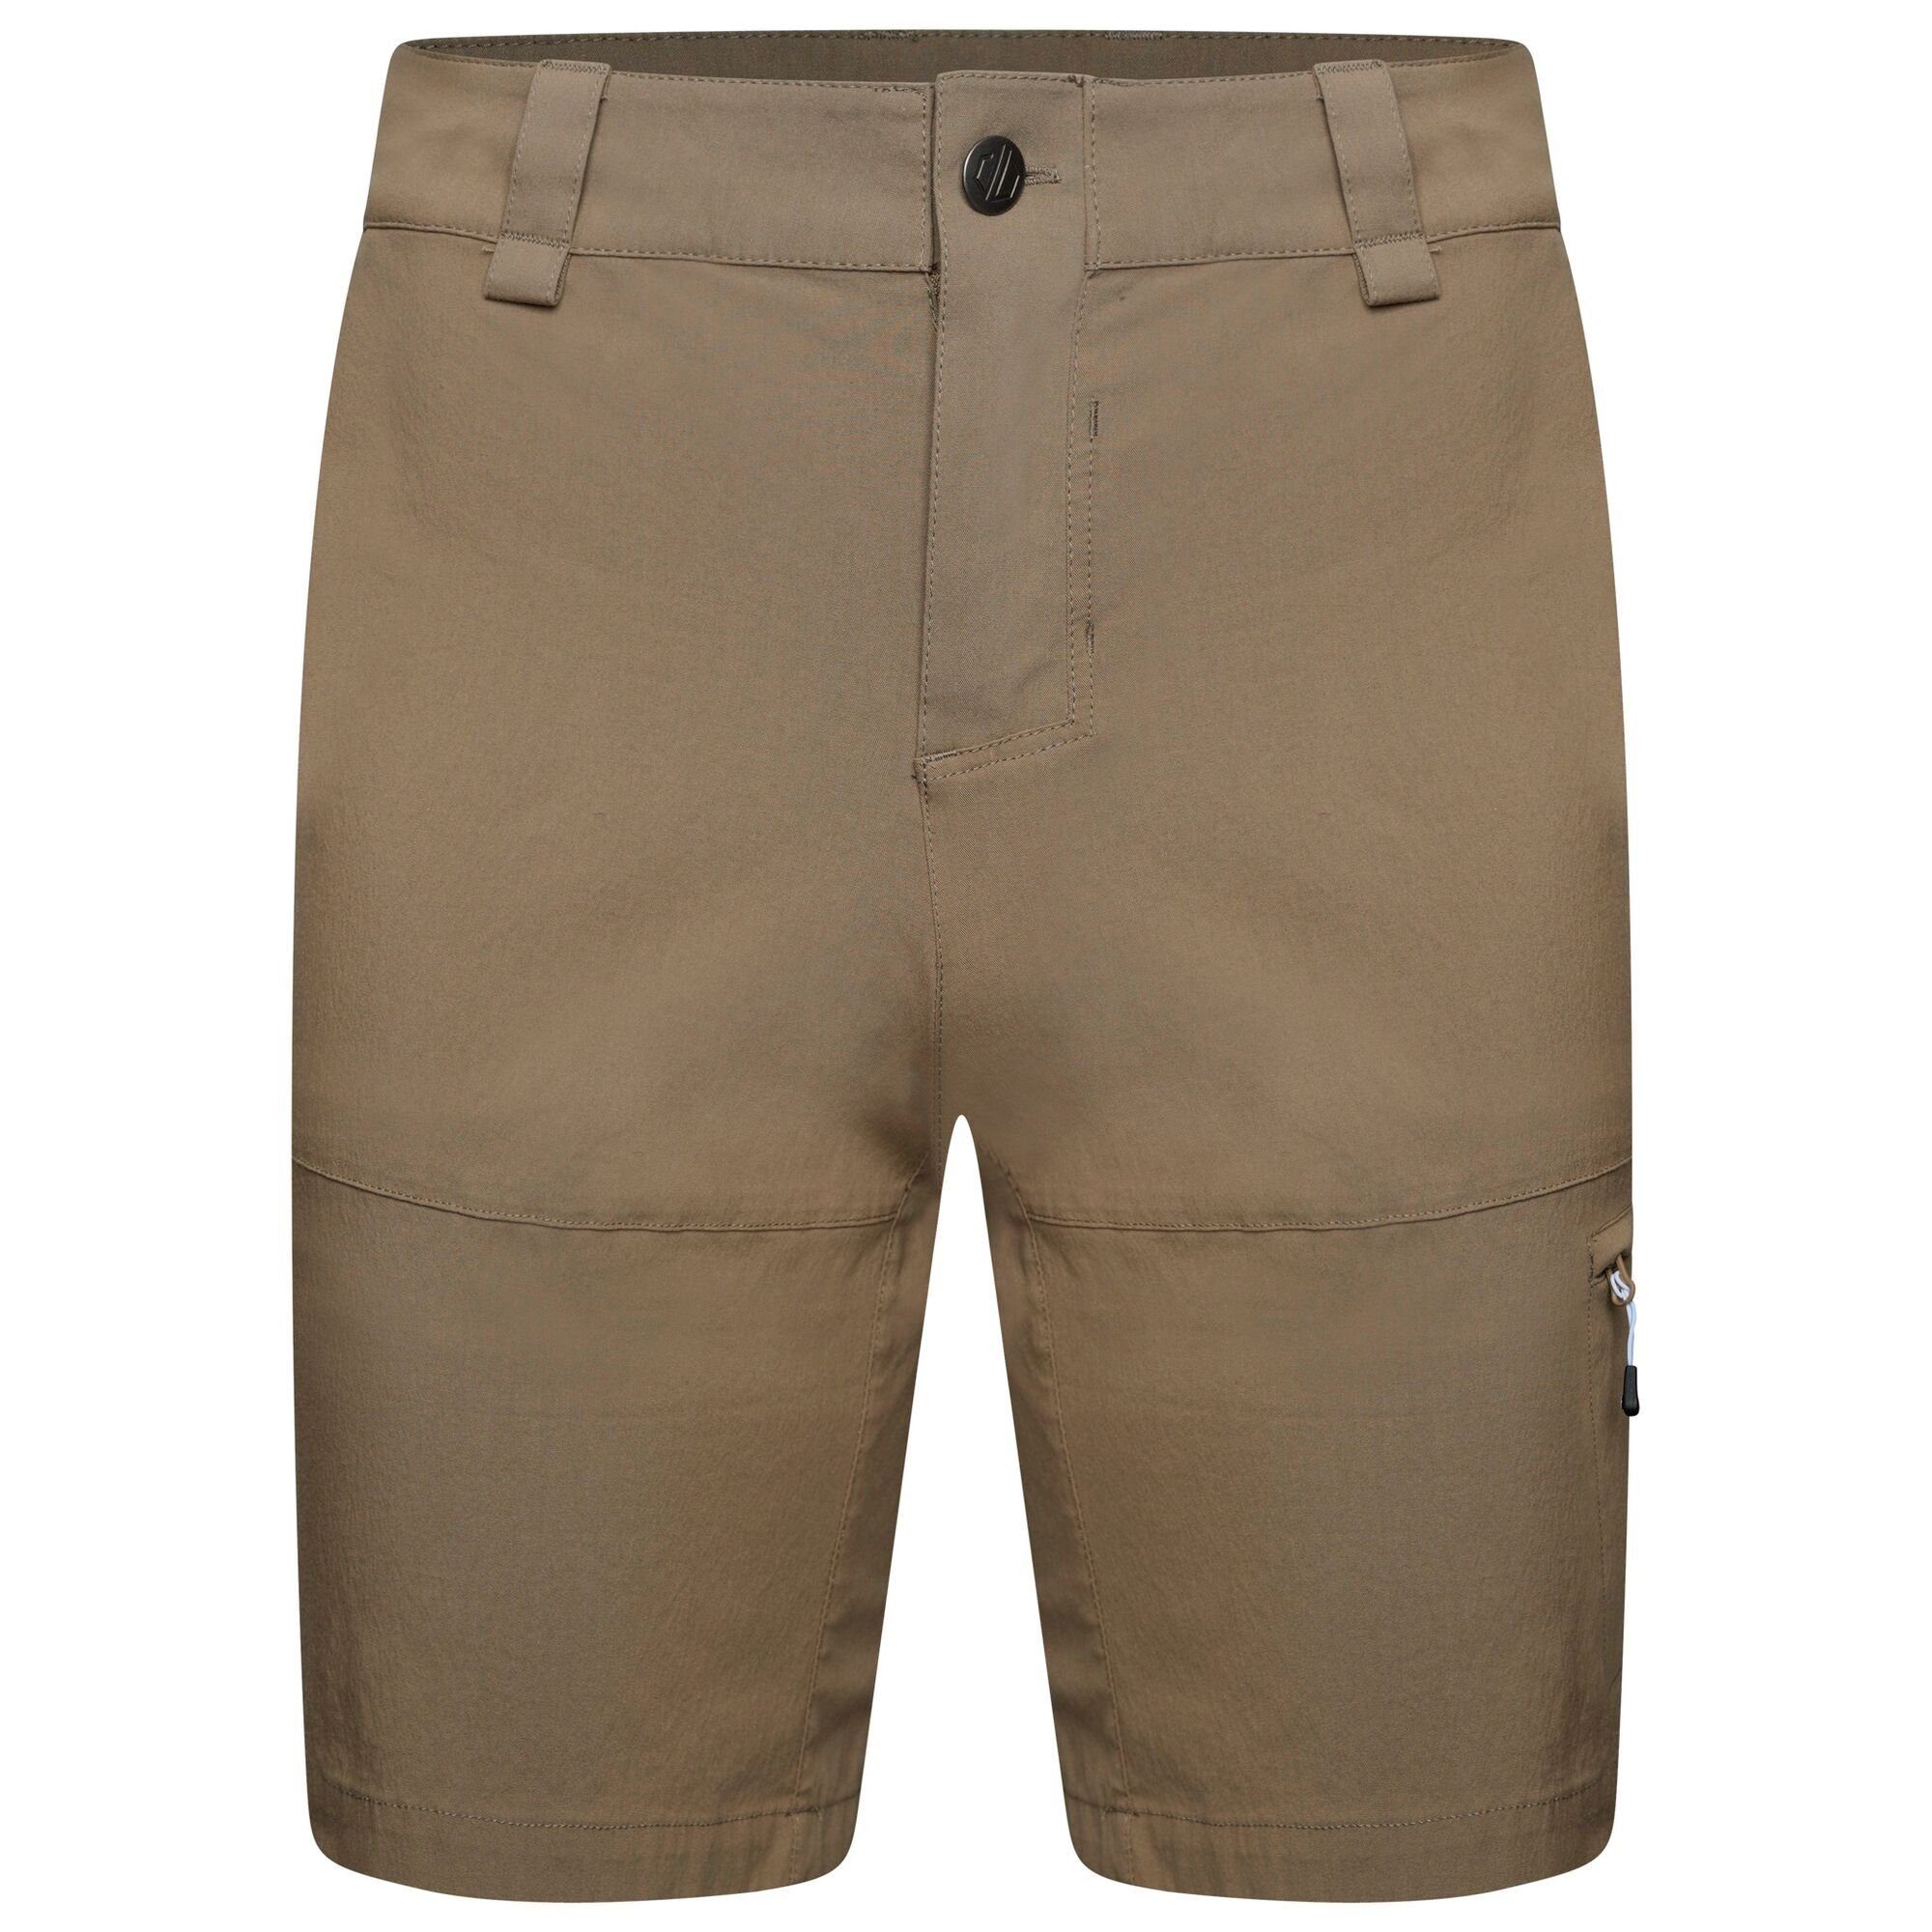 Dare2b Outdoorhose Tuned In Offbeat Gold Sand